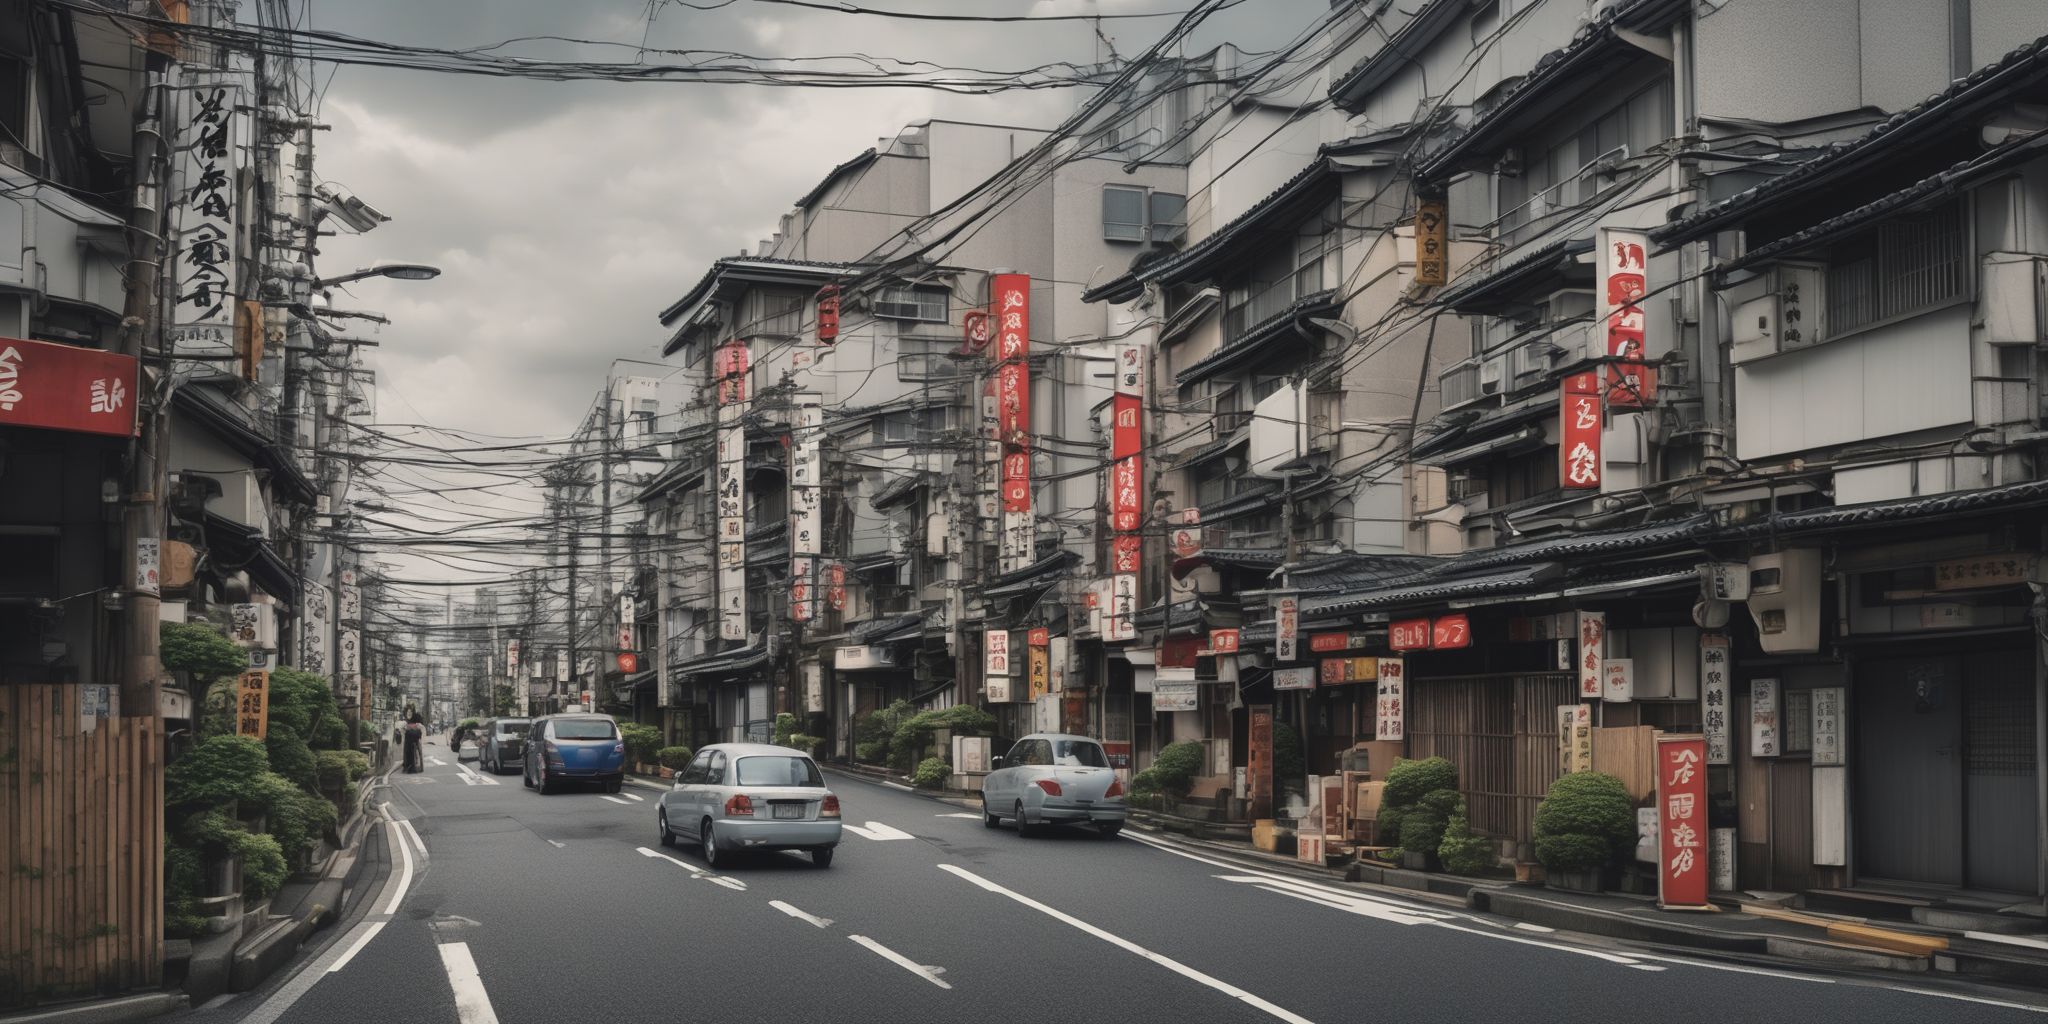 Tokyo  in realistic, photographic style